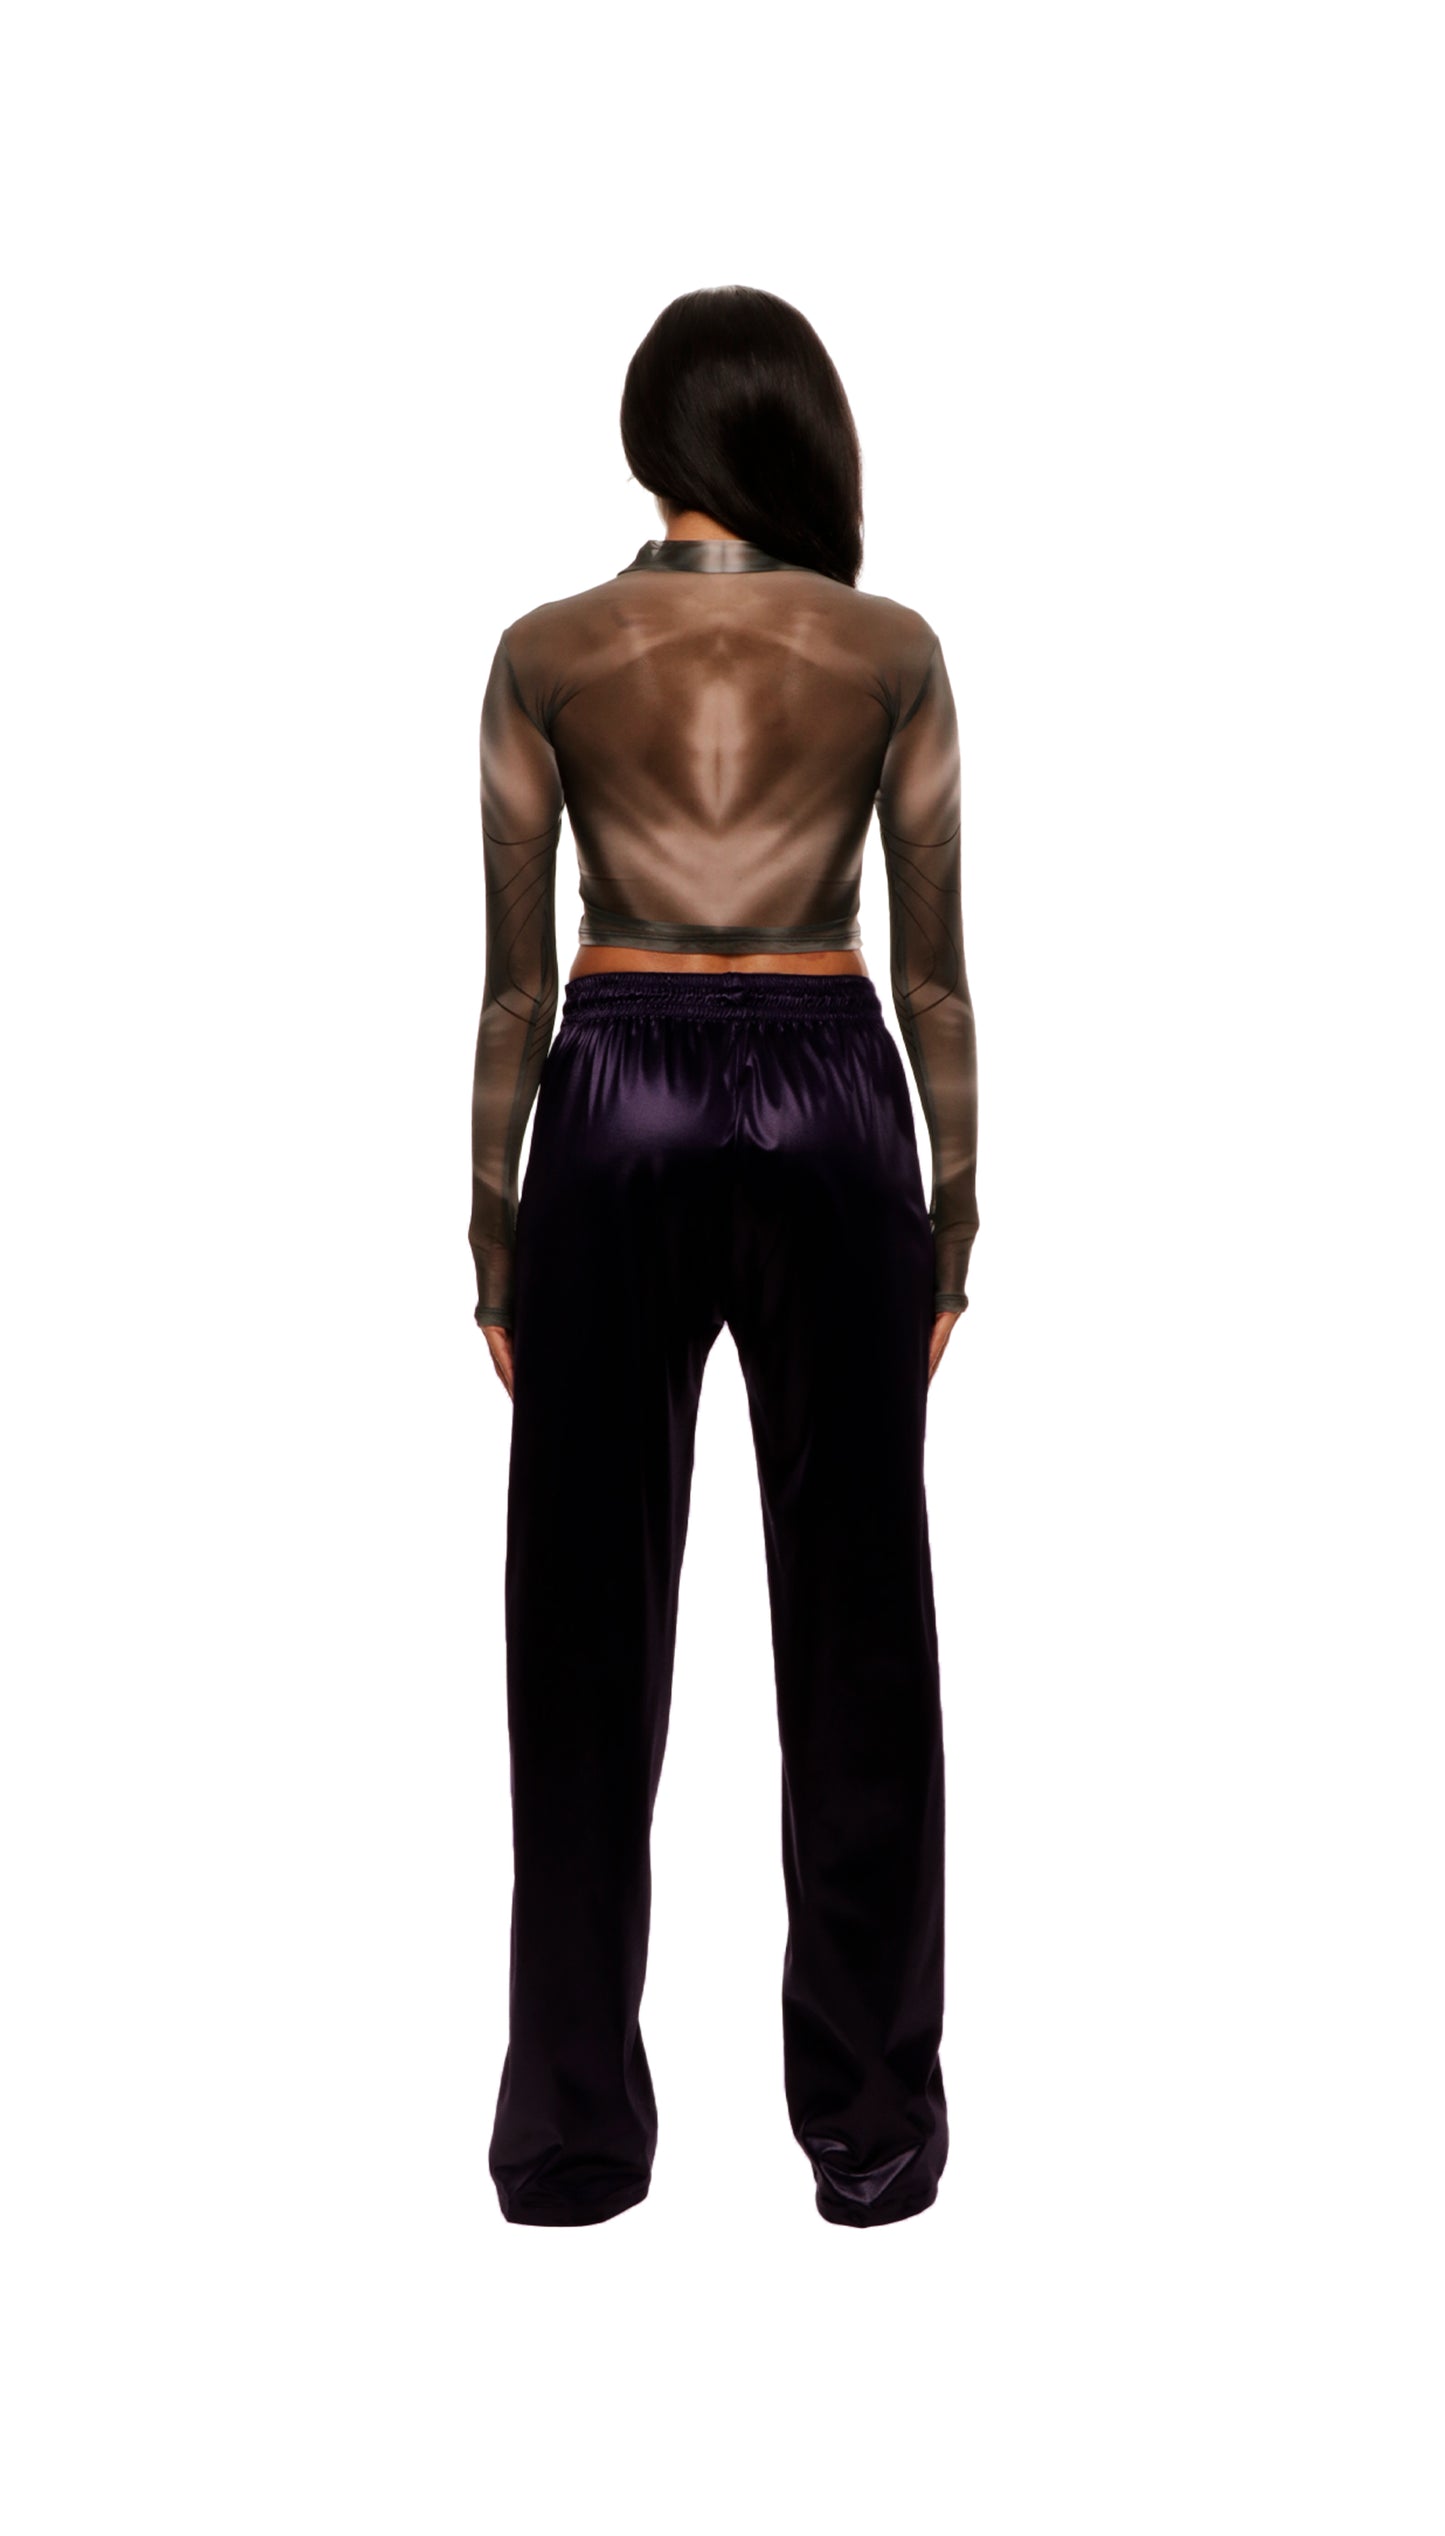 Woman who looks like Beyoncé or Aaliyah wears a grey stretch mesh long sleeve top custom printed to contour the body and resemble an oil spill. Back view paired with shiny purple pants.